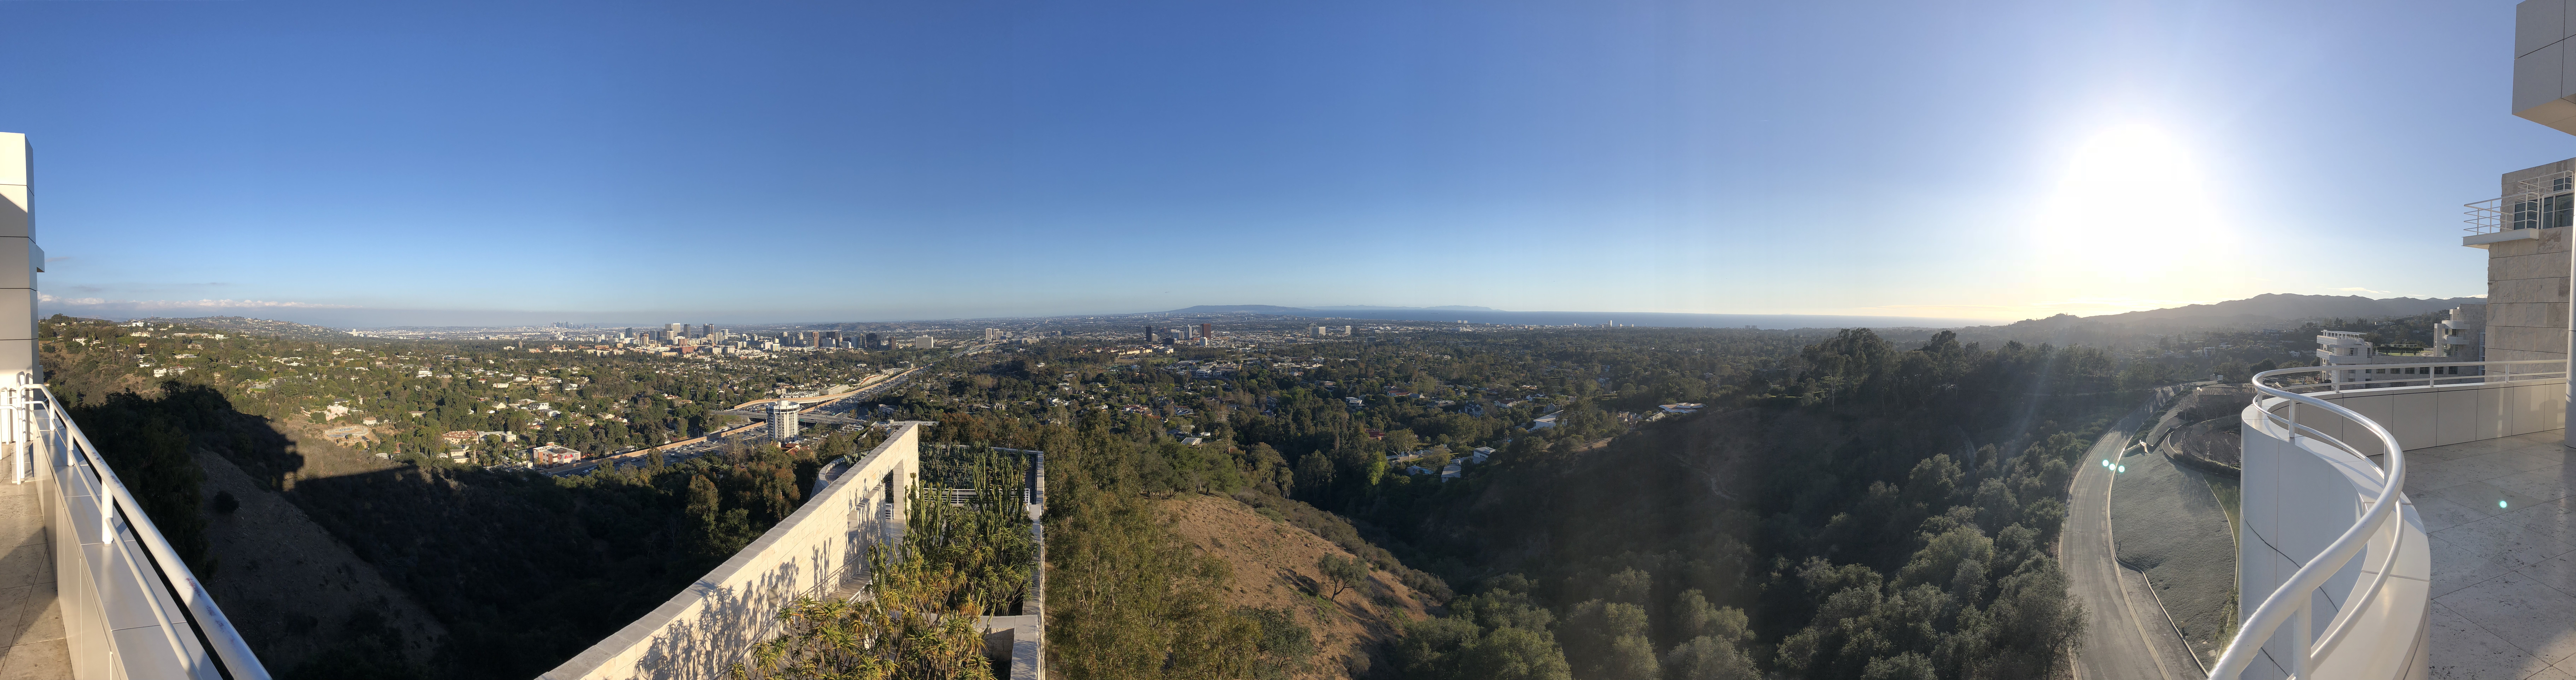 The view from the Getty Center